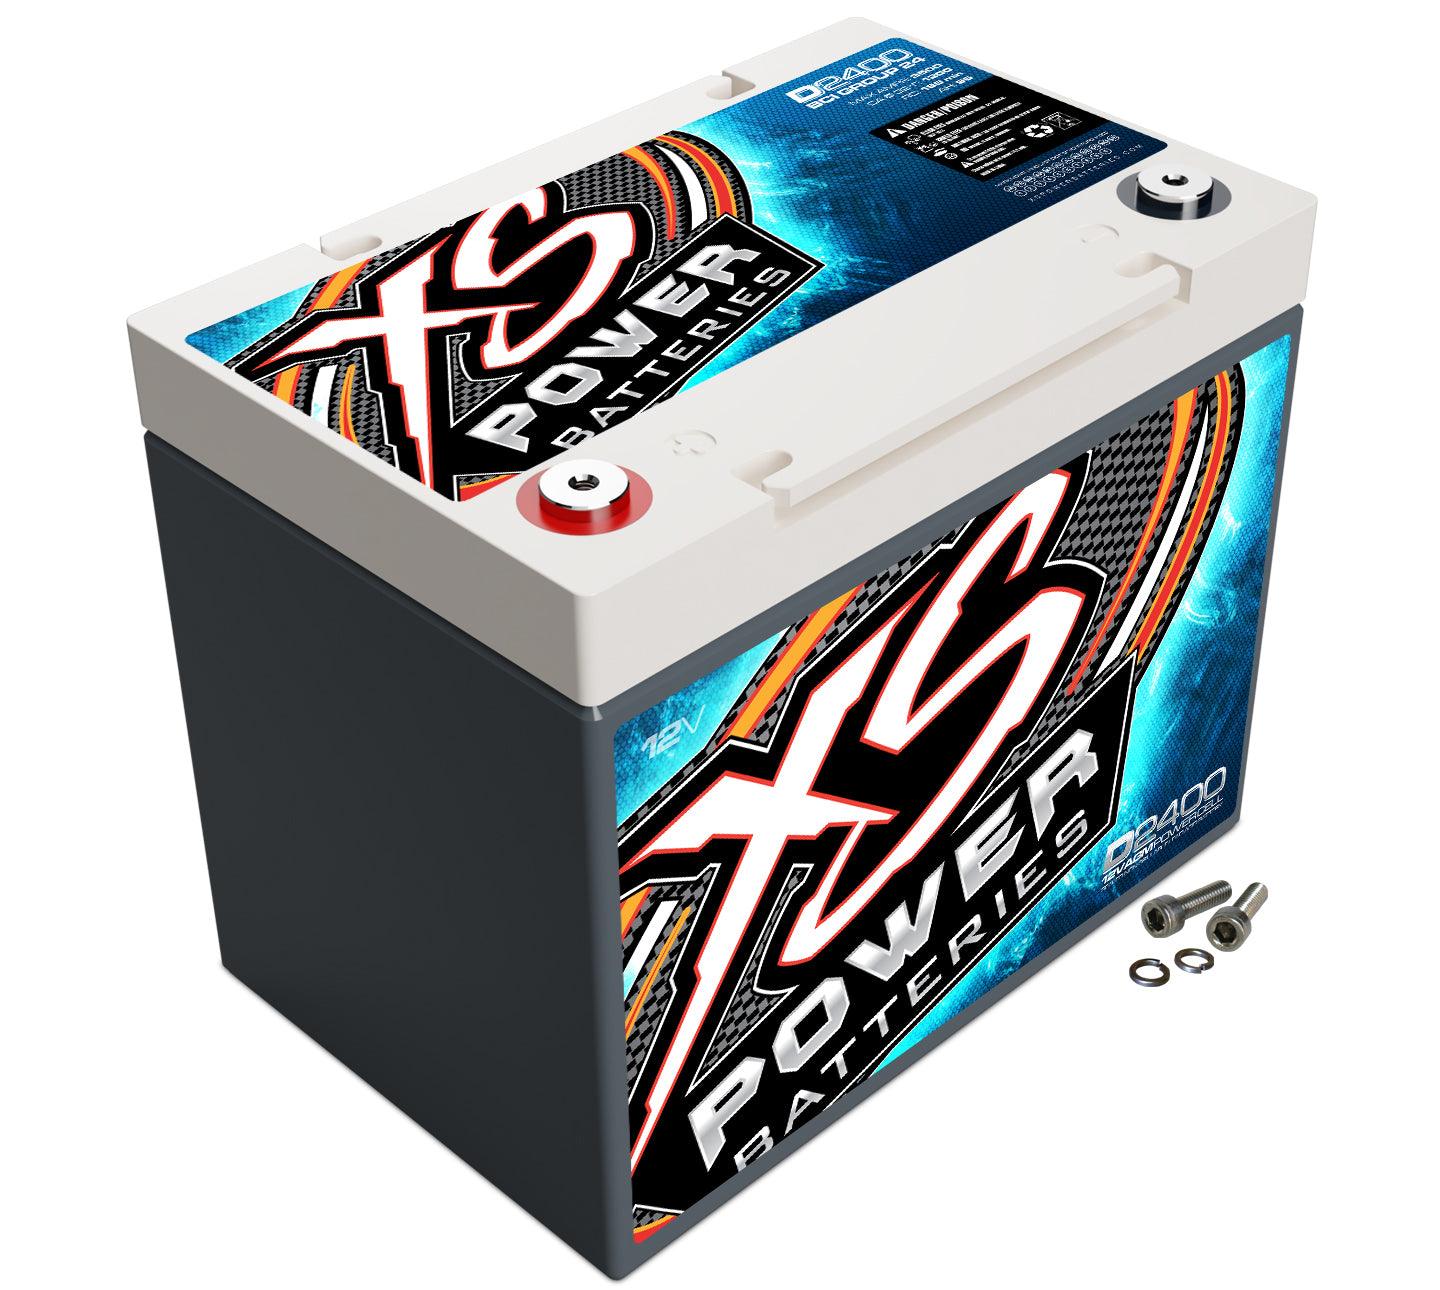 XS Power AGM Battery 12 Volt 1200a CA - Burlile Performance Products